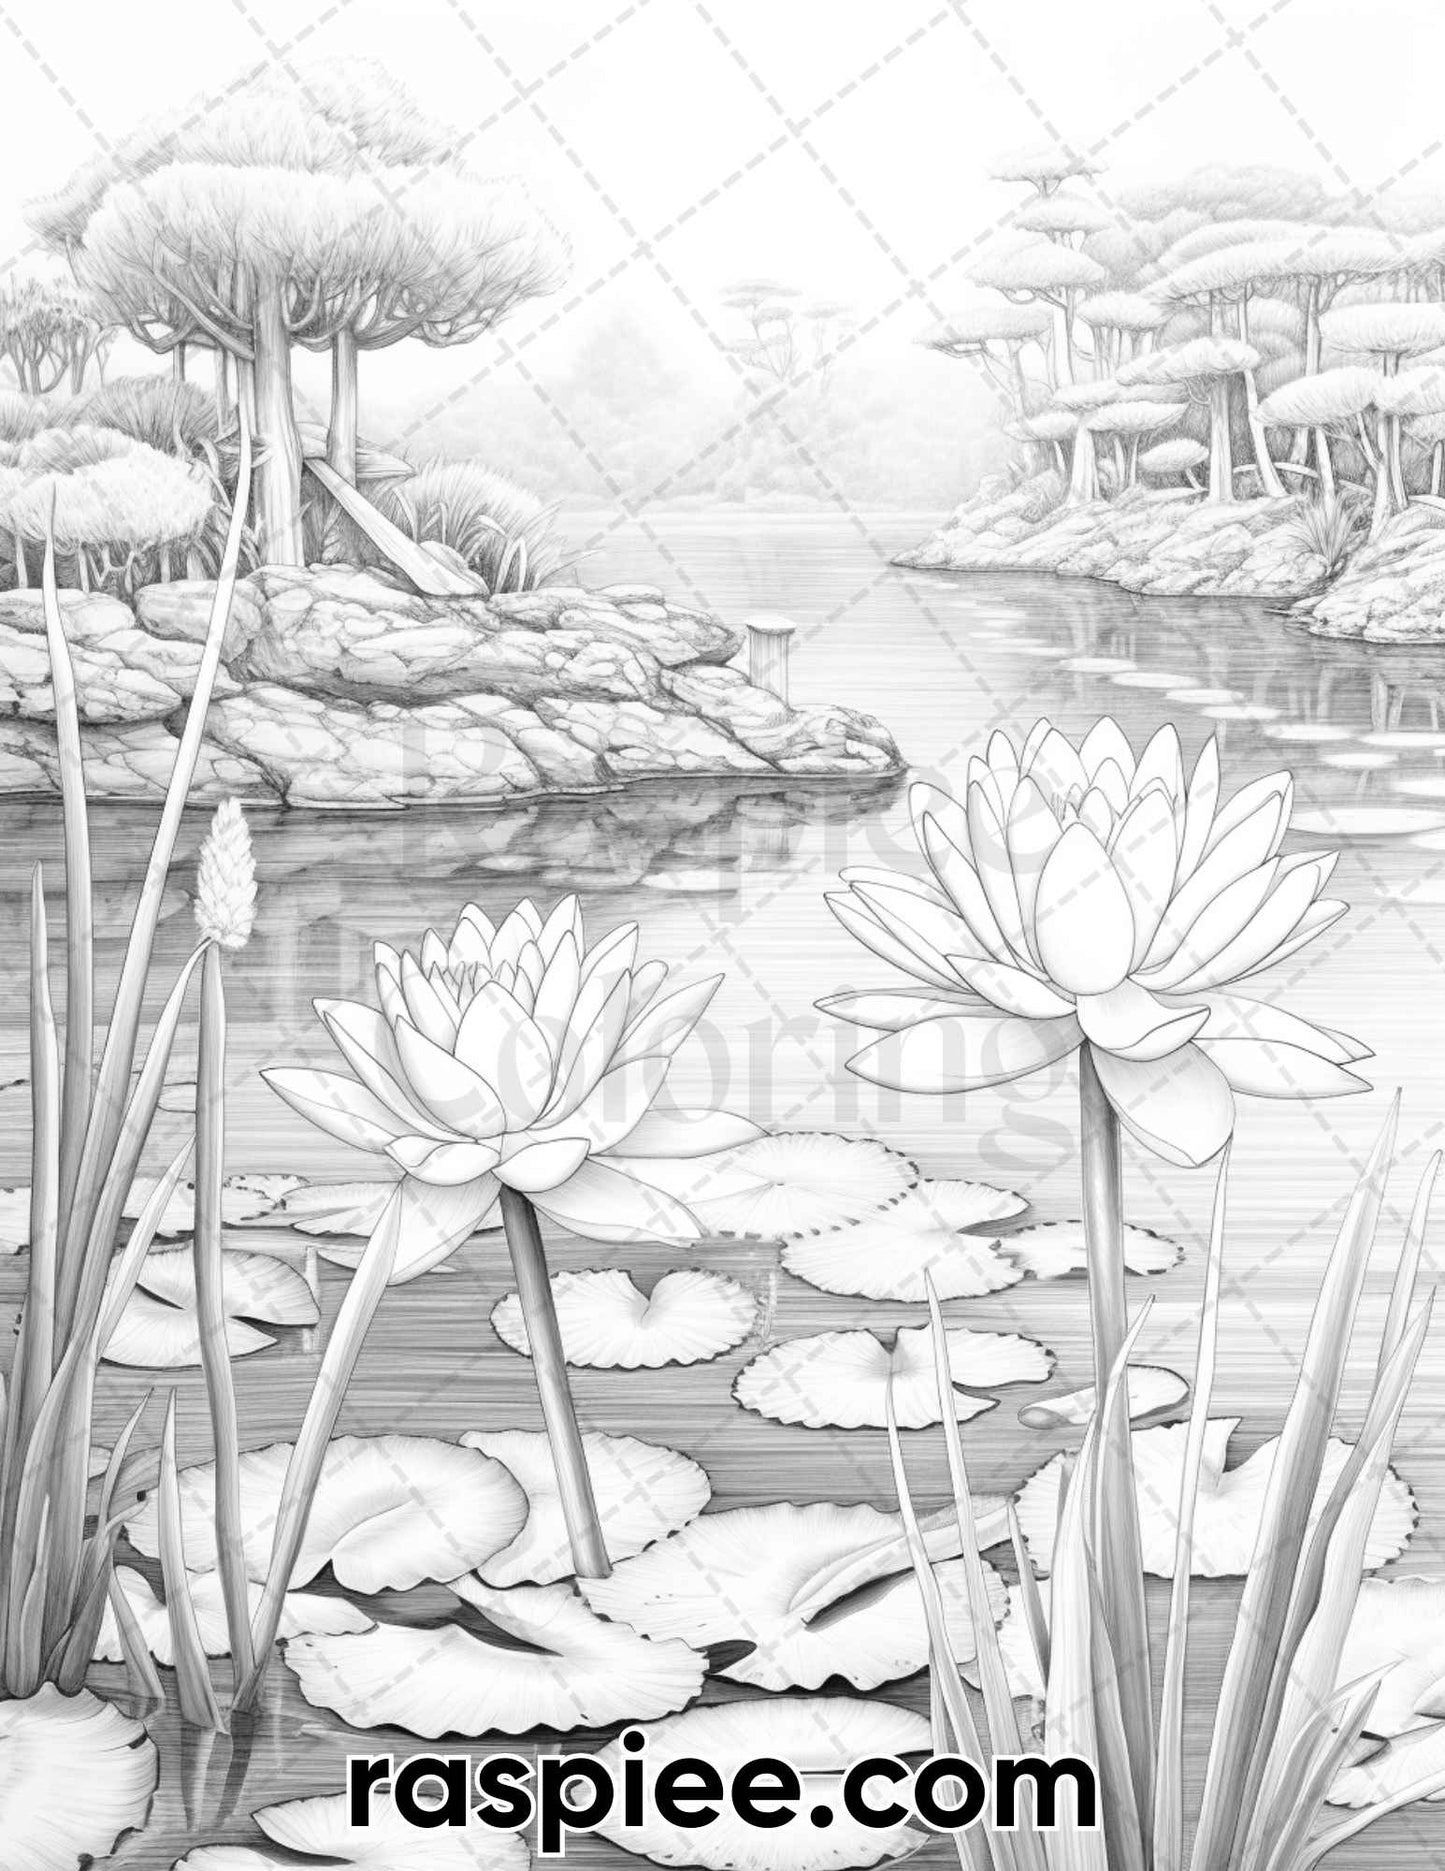 adult coloring pages, adult coloring sheets, adult coloring book pdf, adult coloring book printable, grayscale coloring pages, grayscale coloring books, spring coloring pages for adults, spring coloring book, flower coloring pages for adults, lotus pond coloring pages, flower coloring book, summer coloring pages